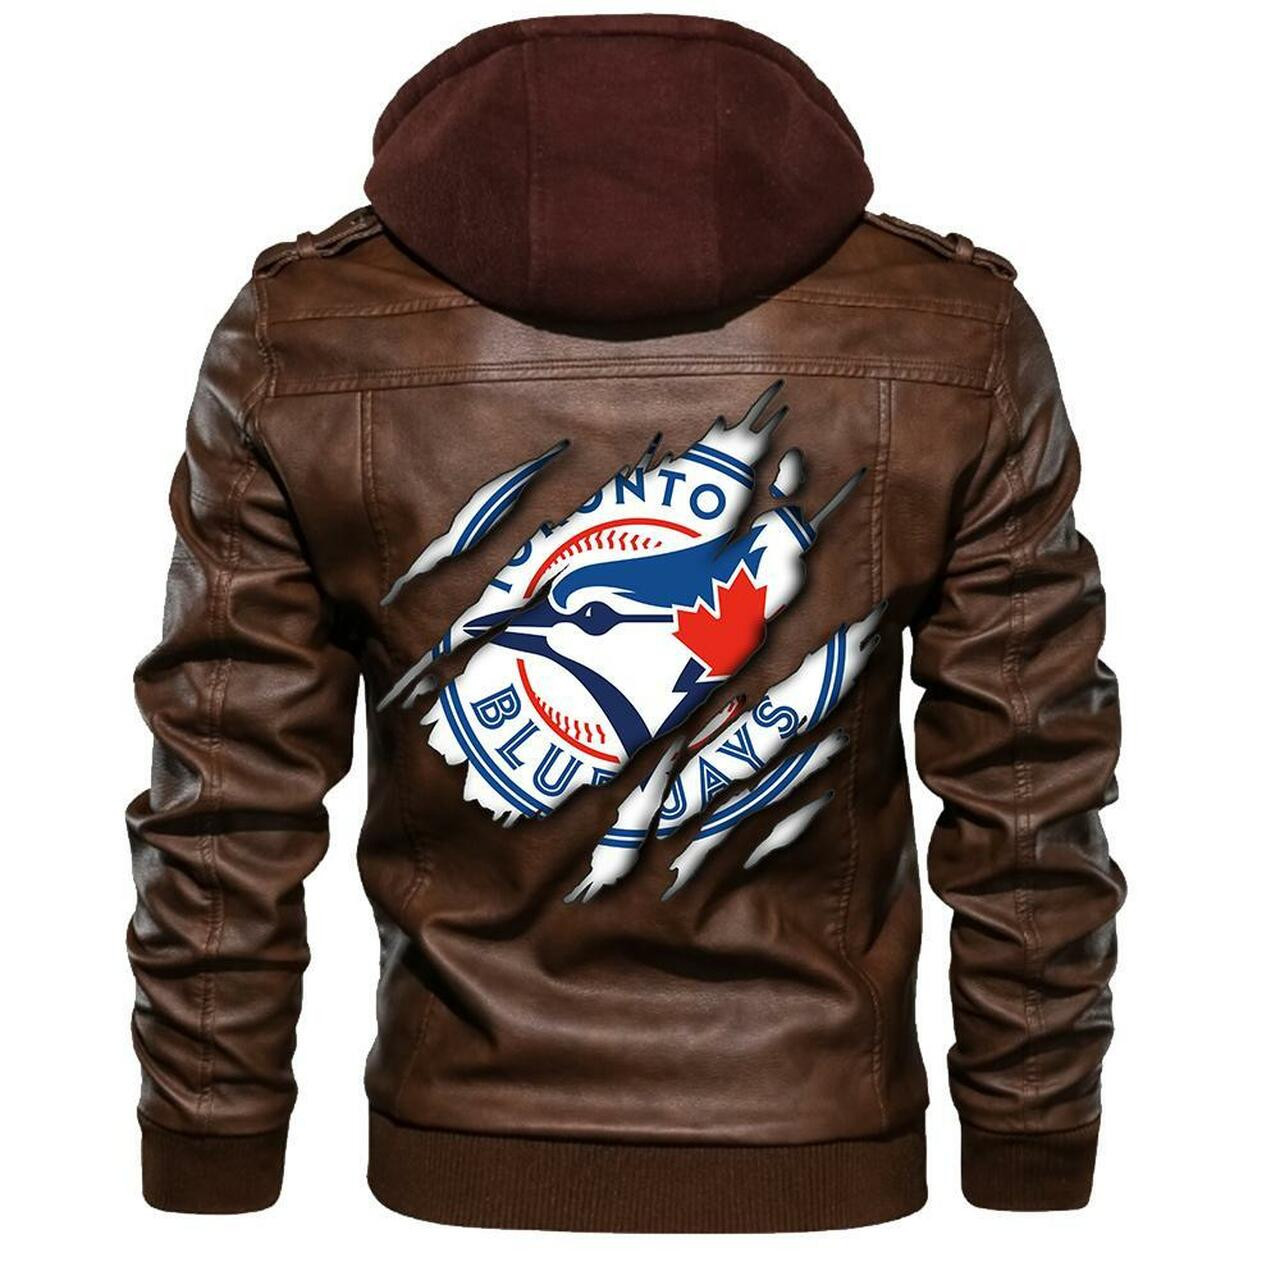 Check out and find the right leather jacket below 393